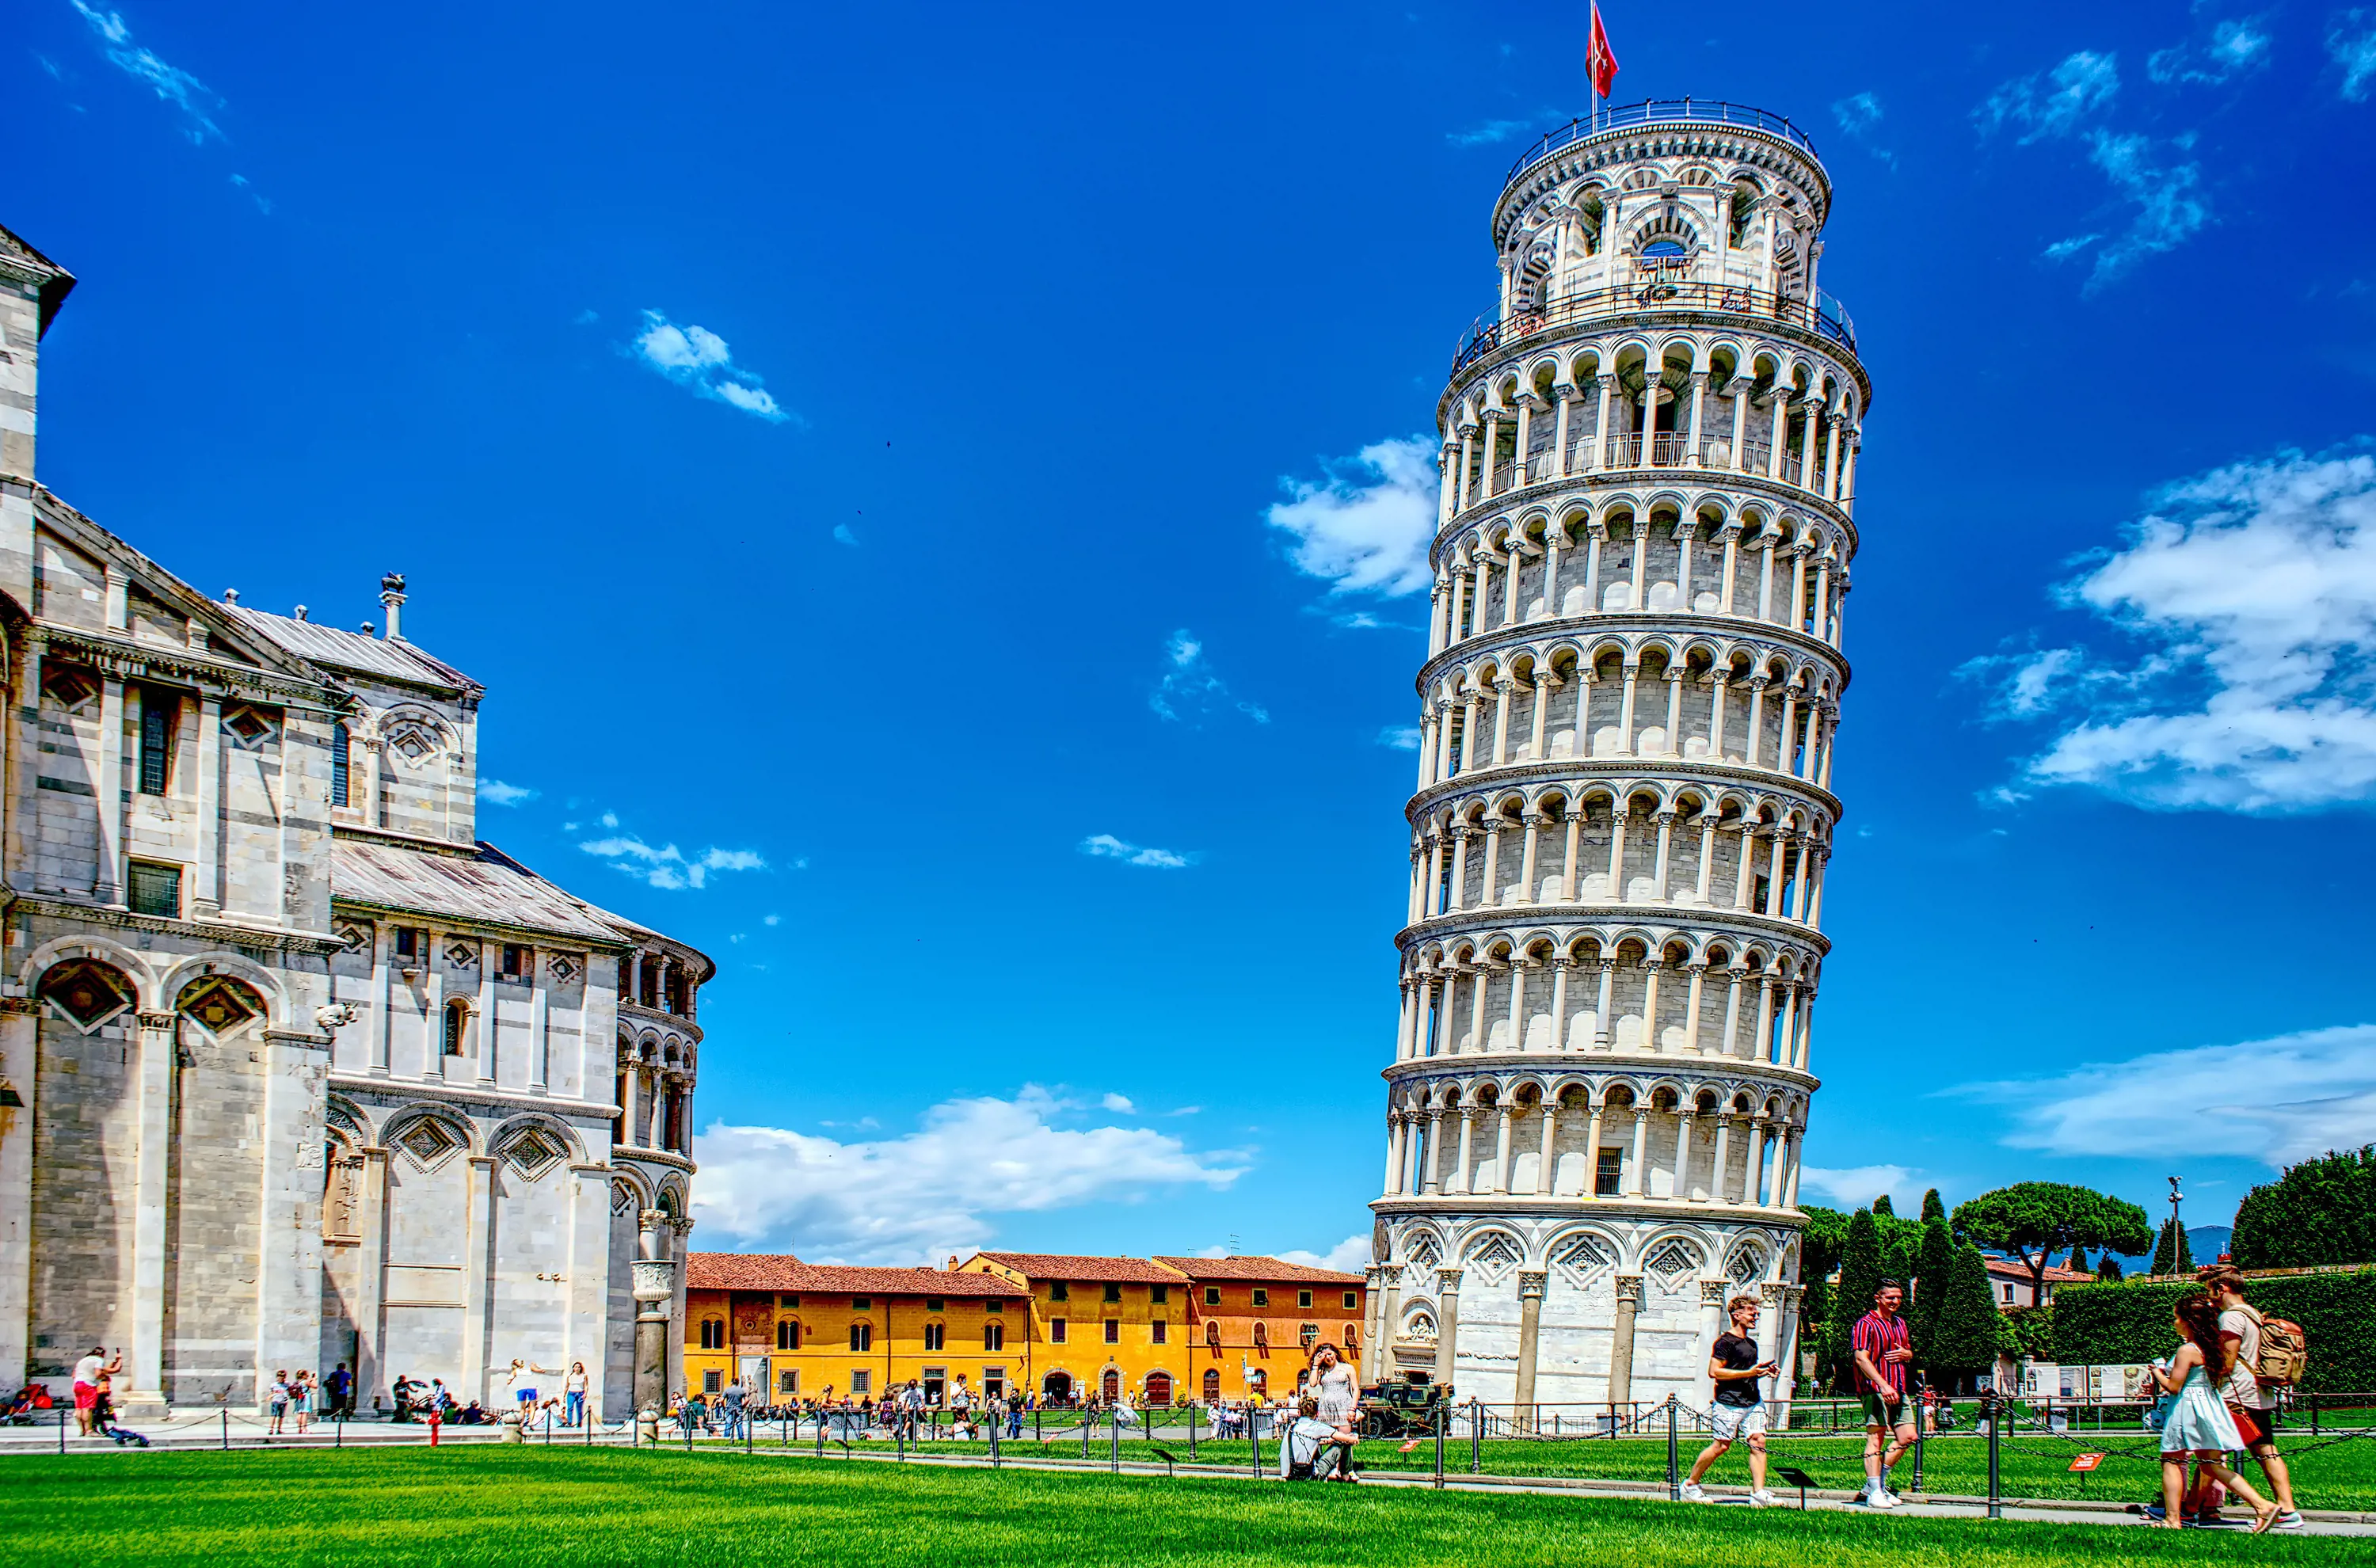 Florence Leaning Tower Of Pisa (1)